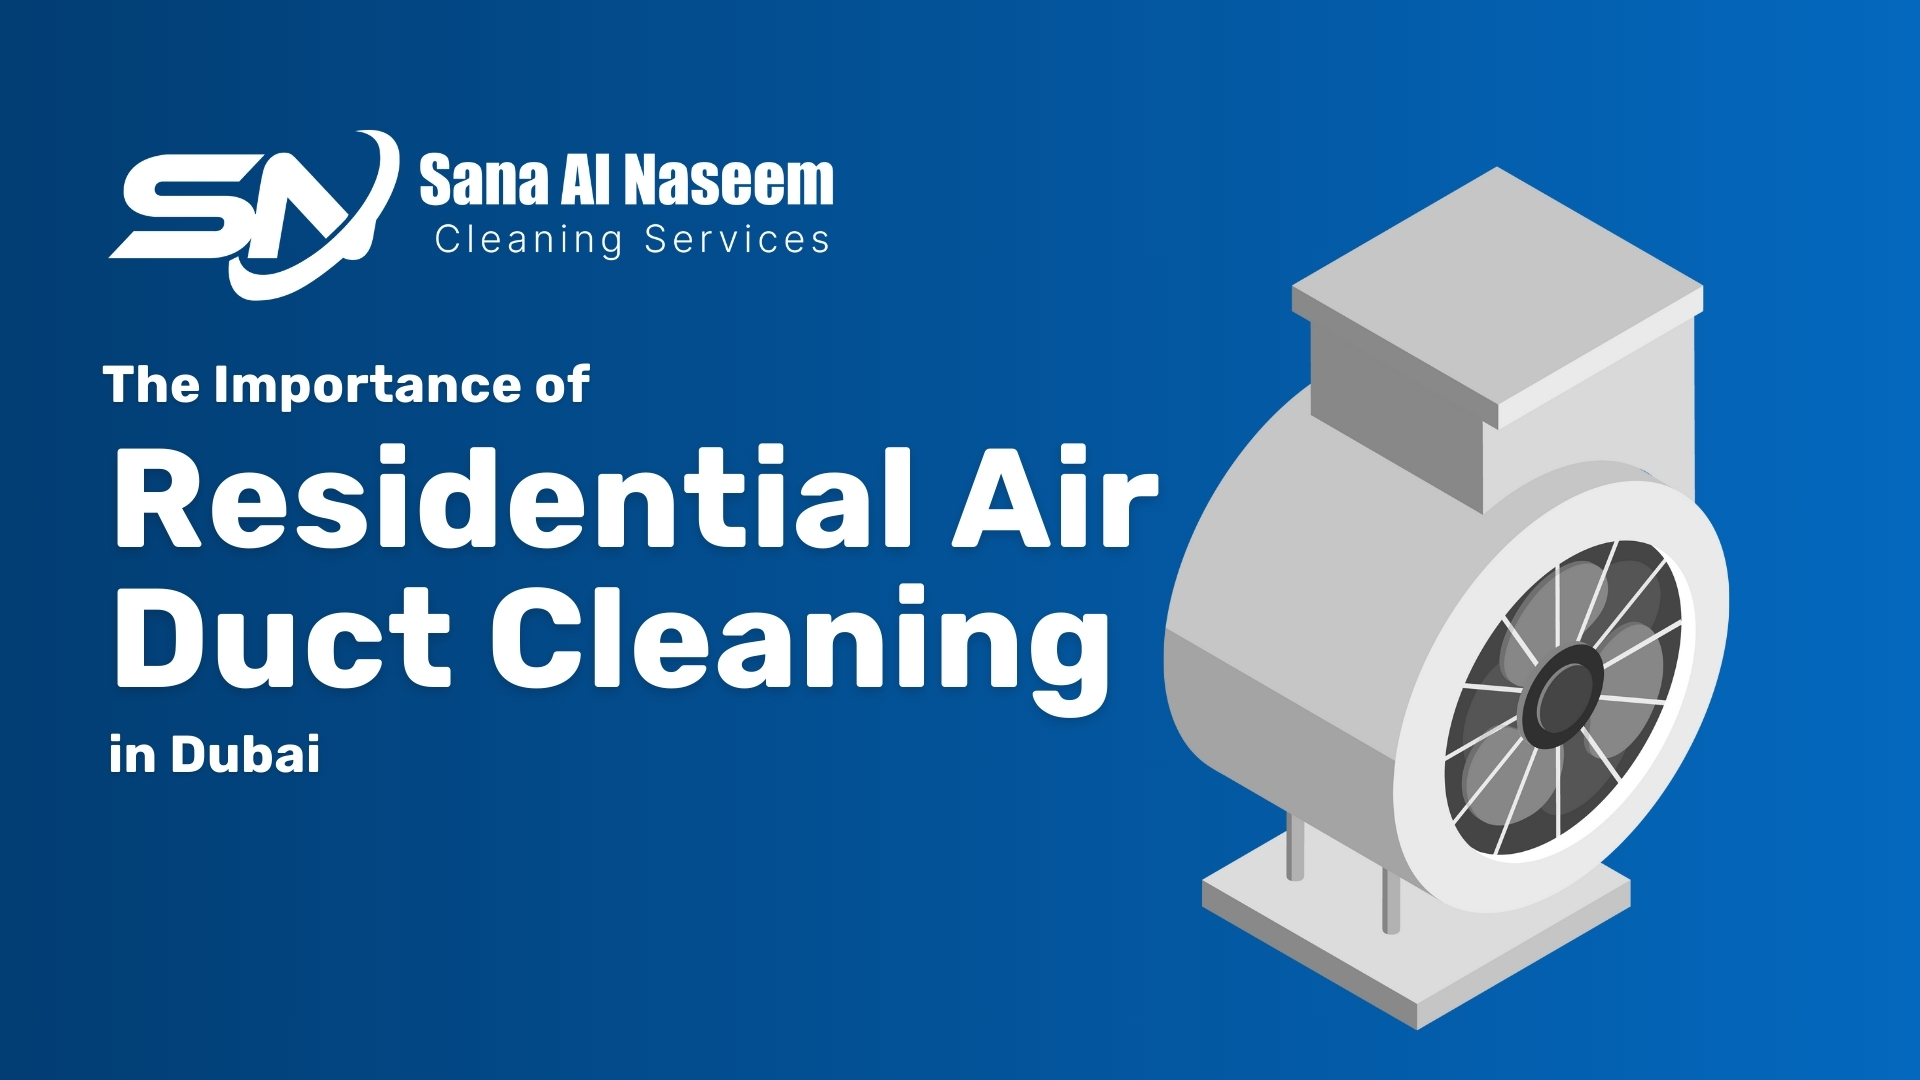 The Importance of Residential Air Duct Cleaning in Dubai